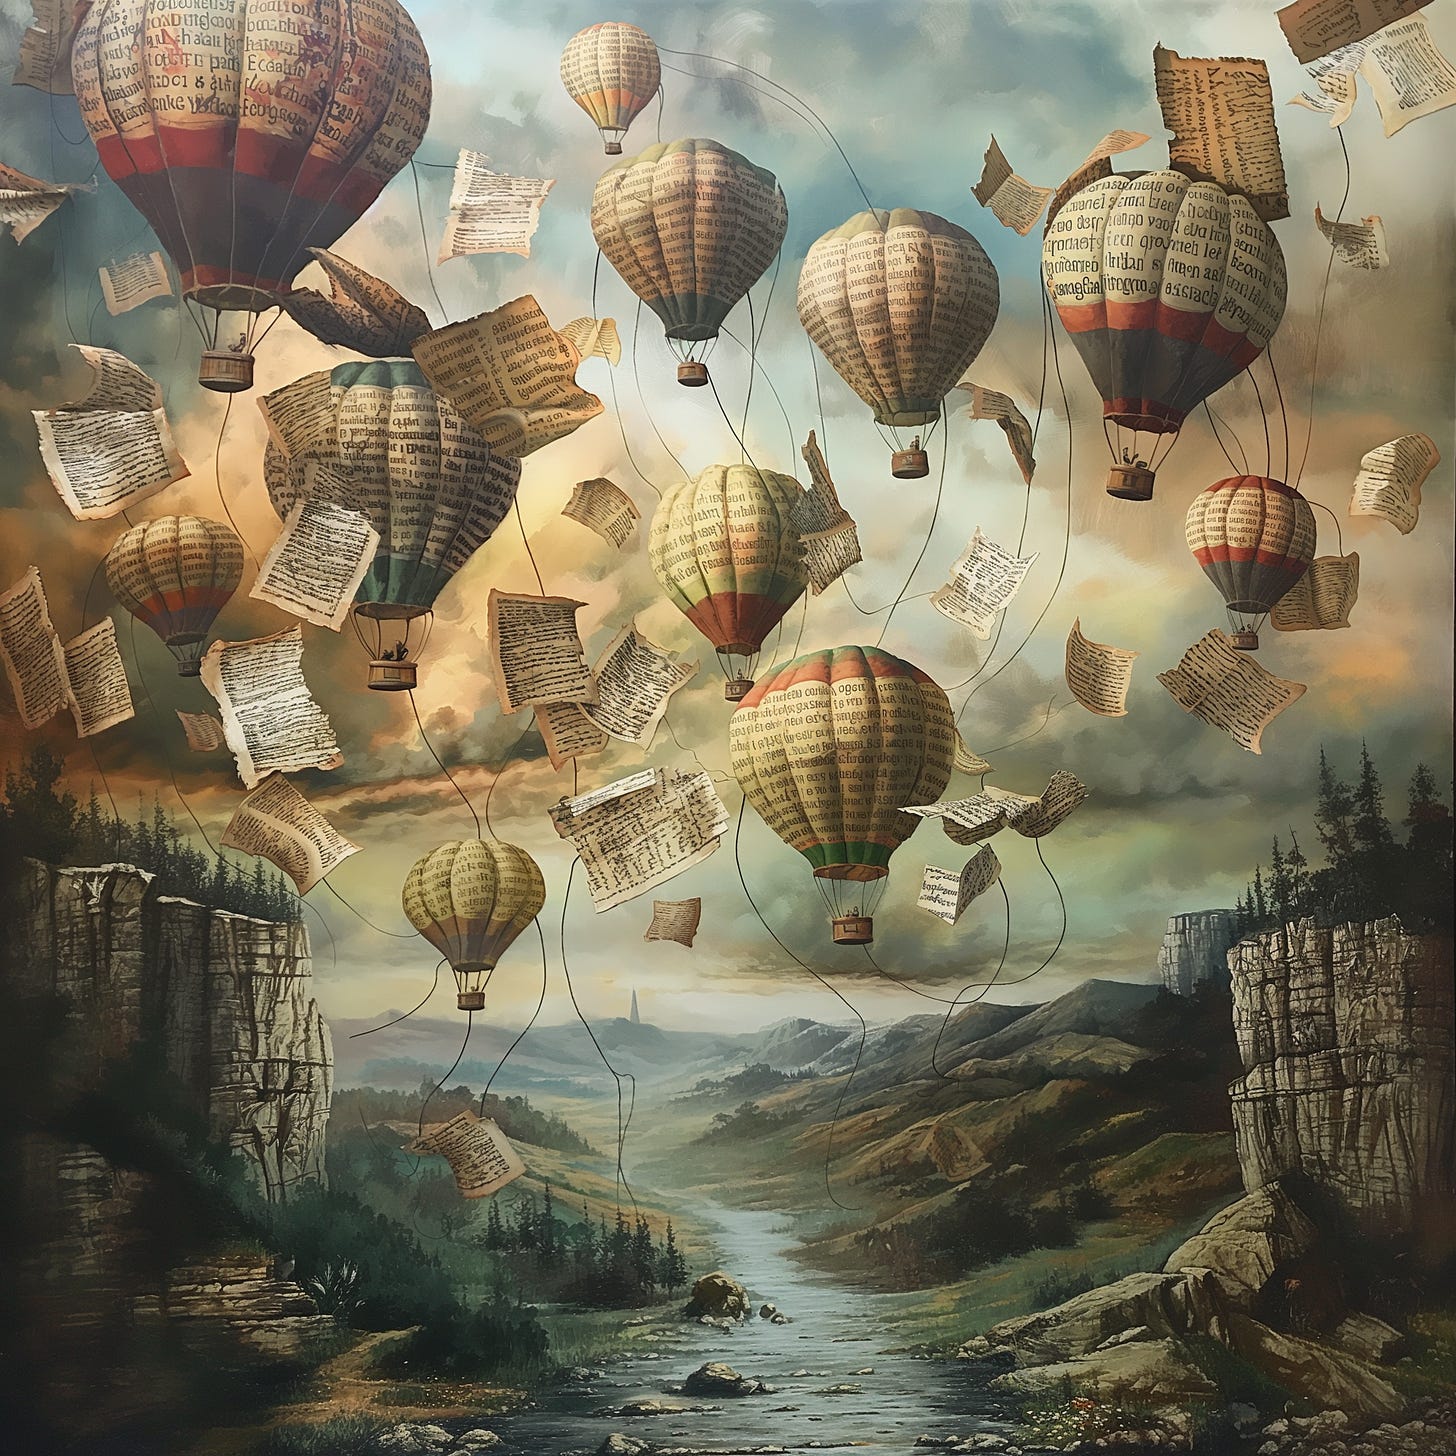 Hot air balloons of identities, words of no meaning; valleys